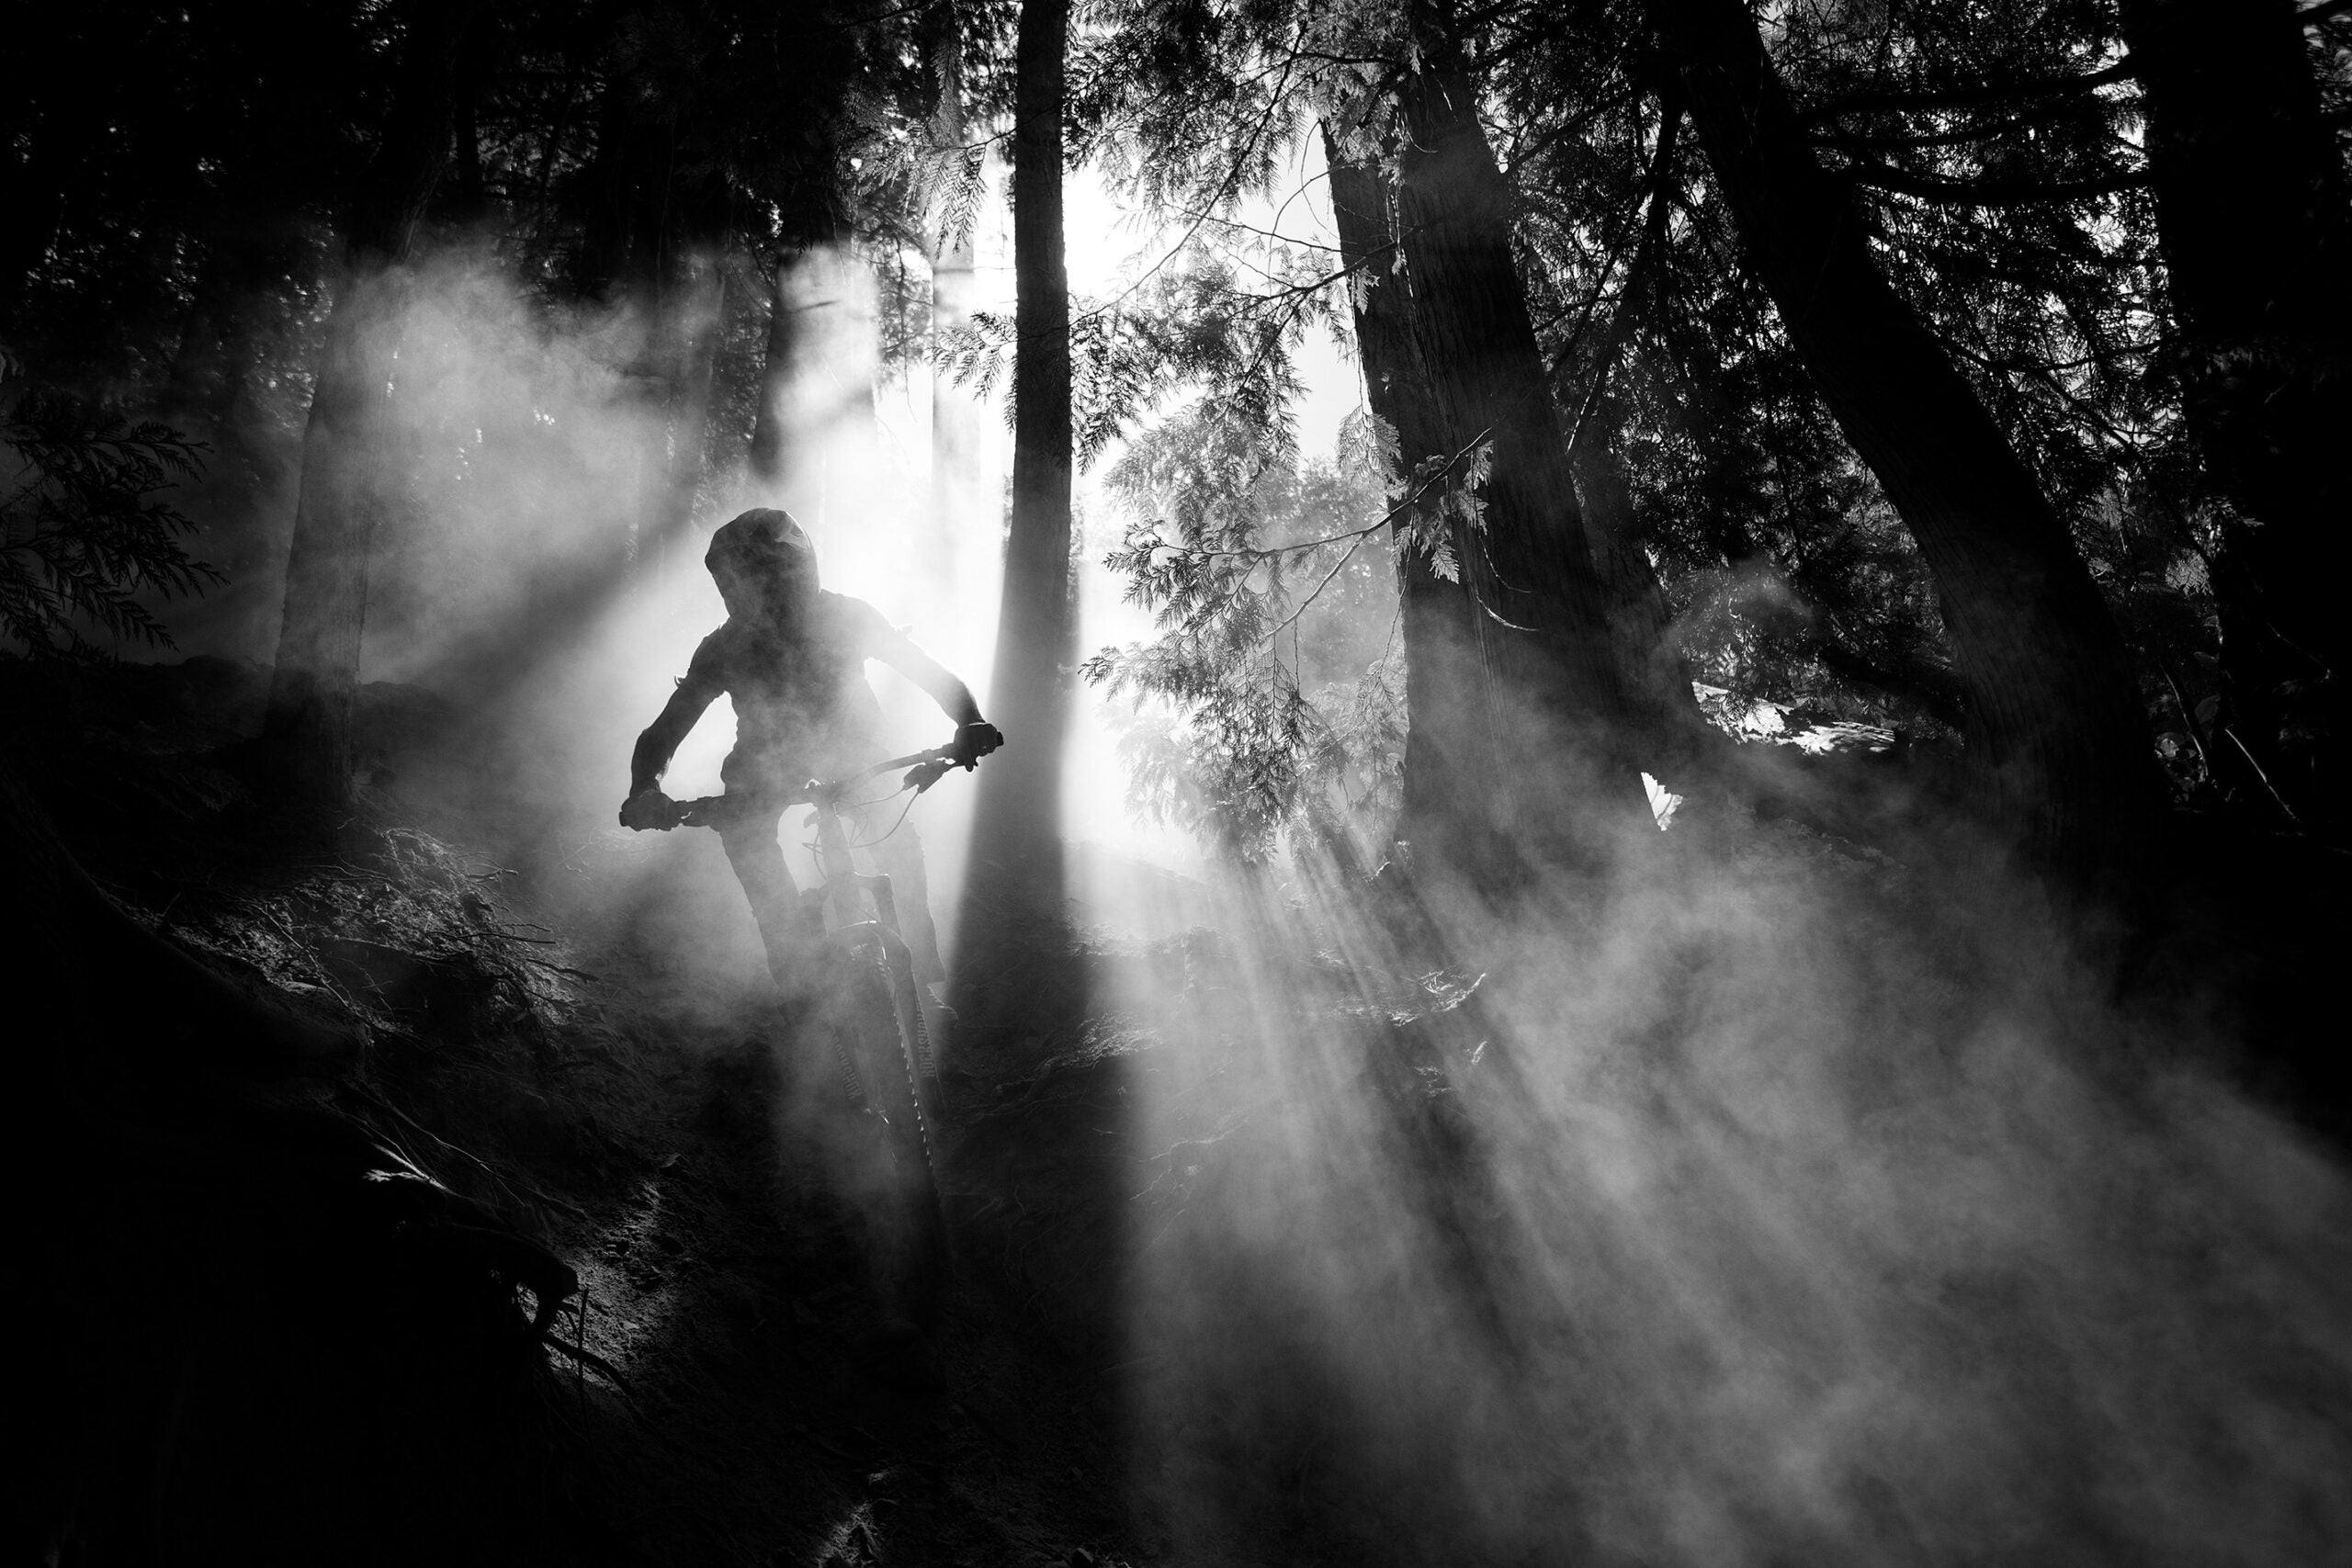 The image depicts mountain biker Dylan Siggers riding through a sun-pierced cloud of dust.